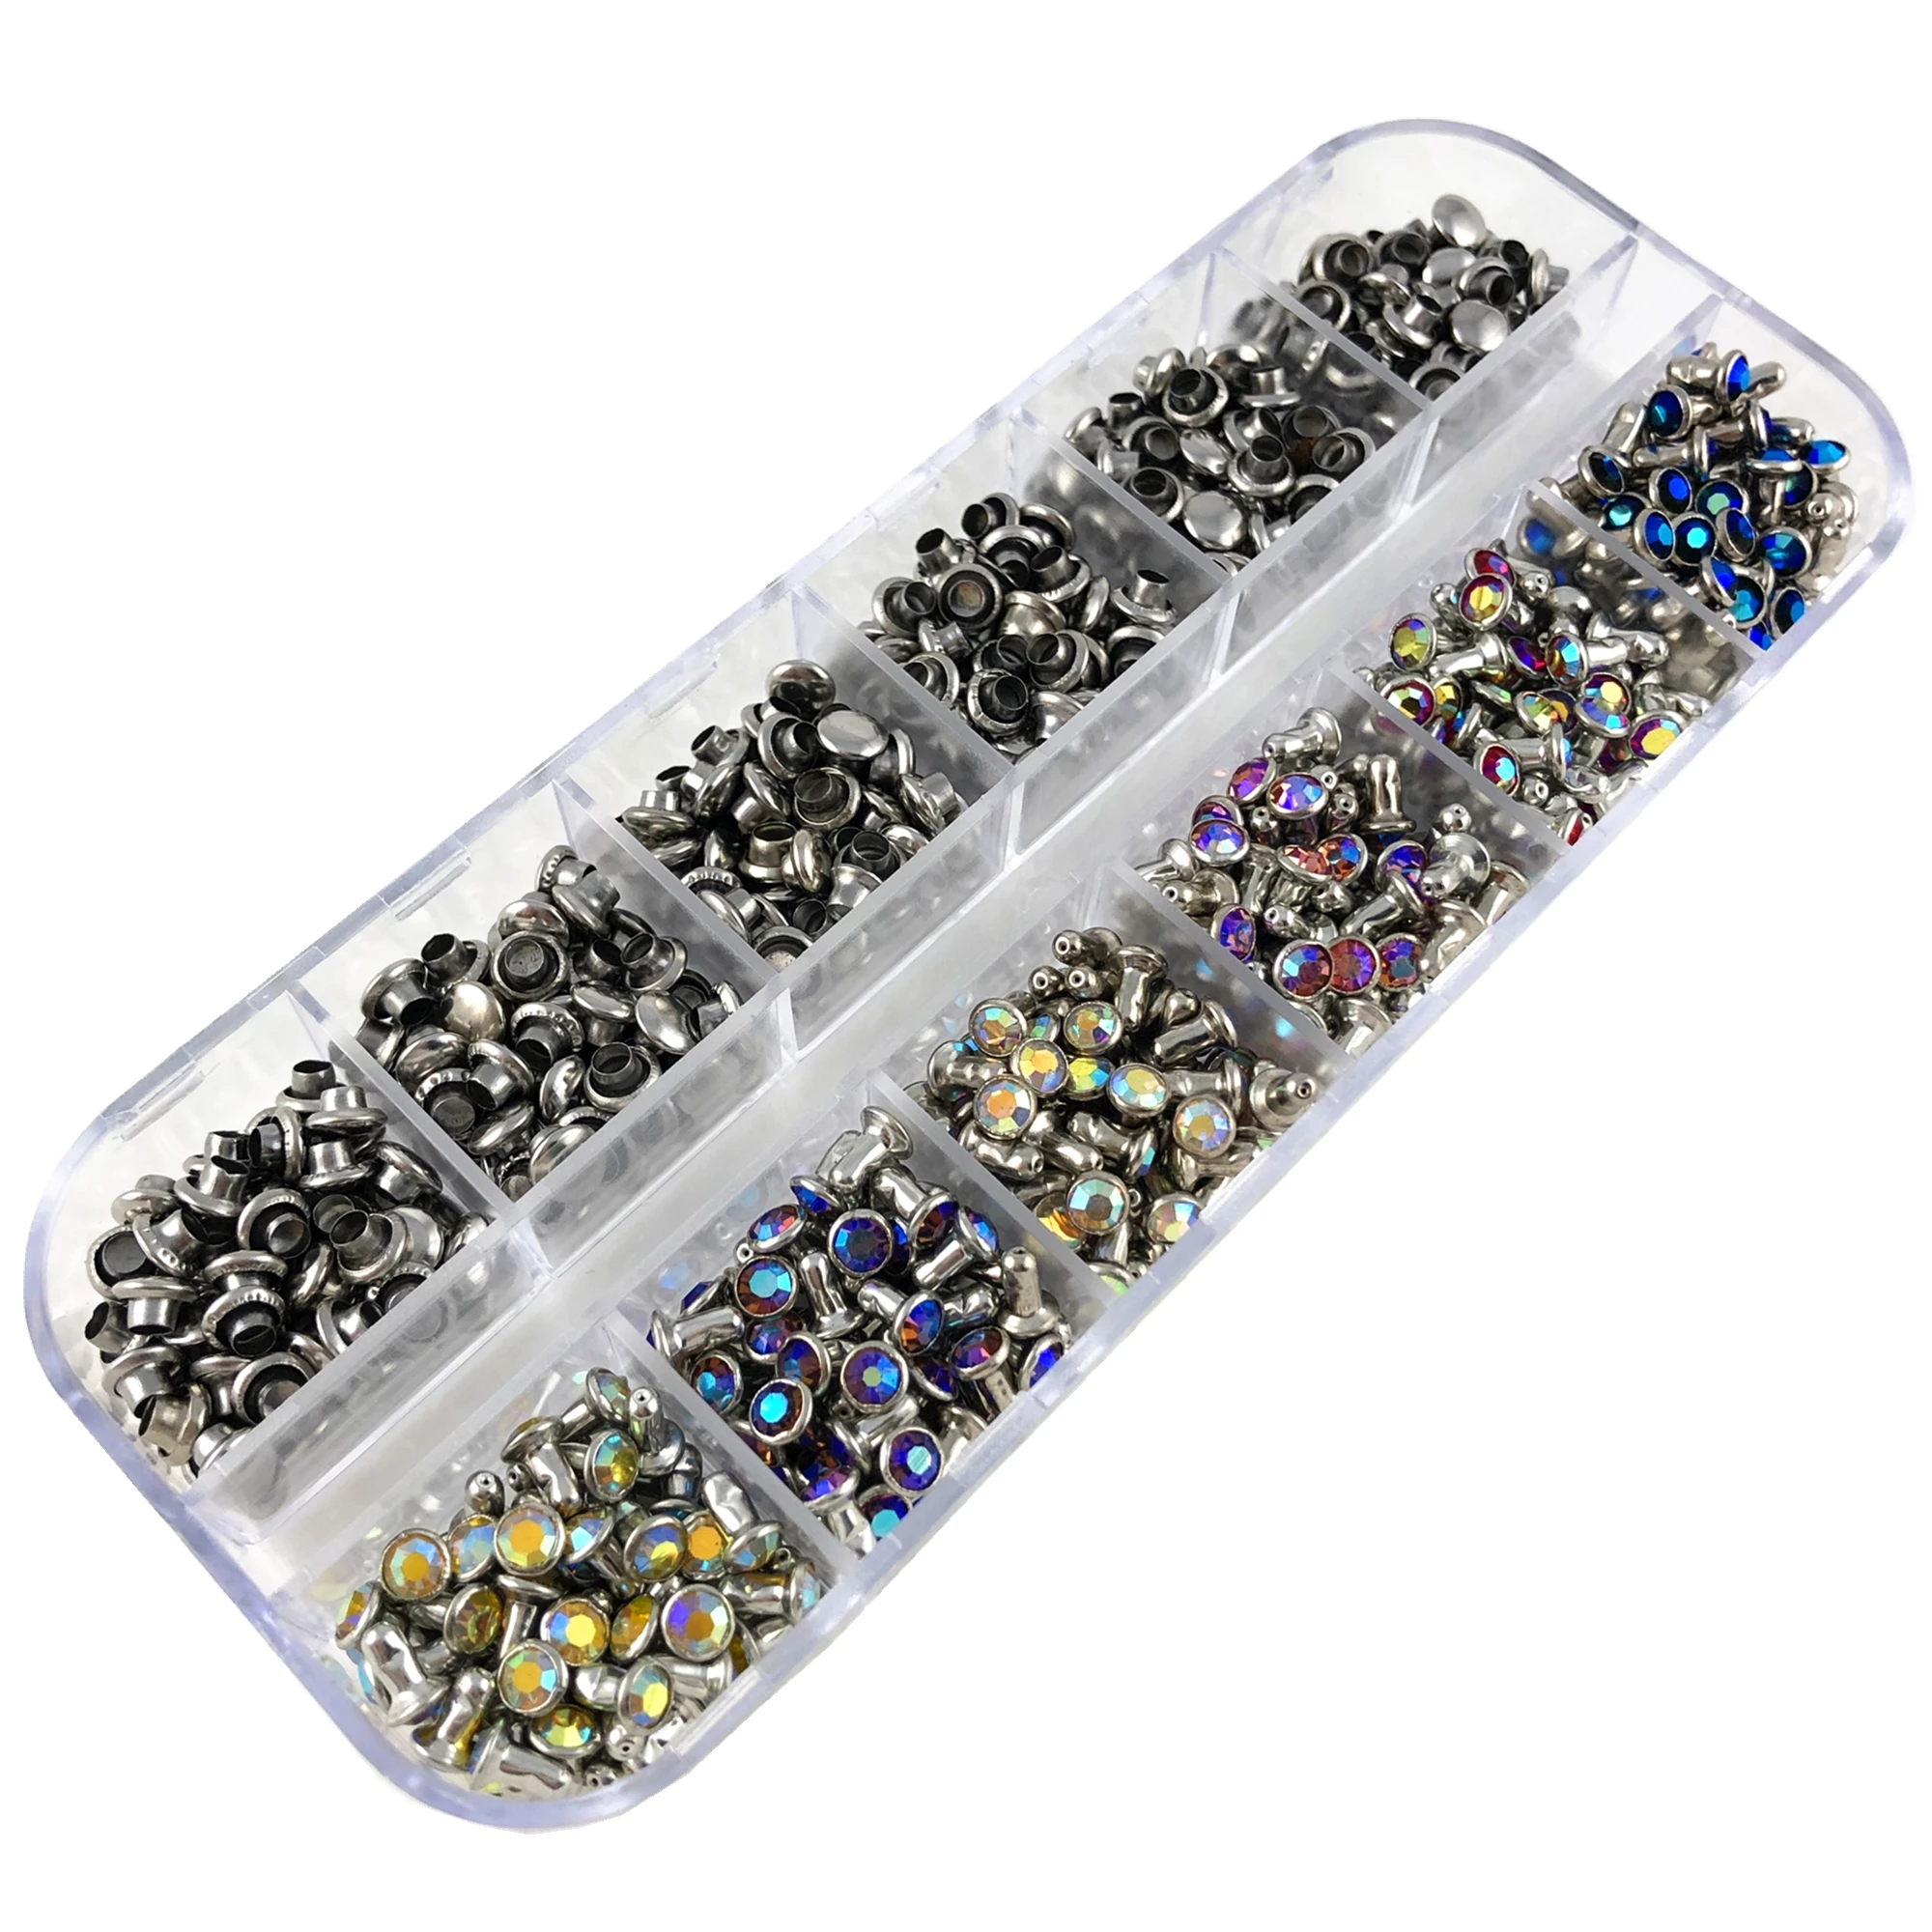 

YORANYO 300 Sets 4MM CZ++ Aurora Borealis Crystal Rivets Silver Plated Mixed AB Color Spots Studs fit for Leather-Crafting